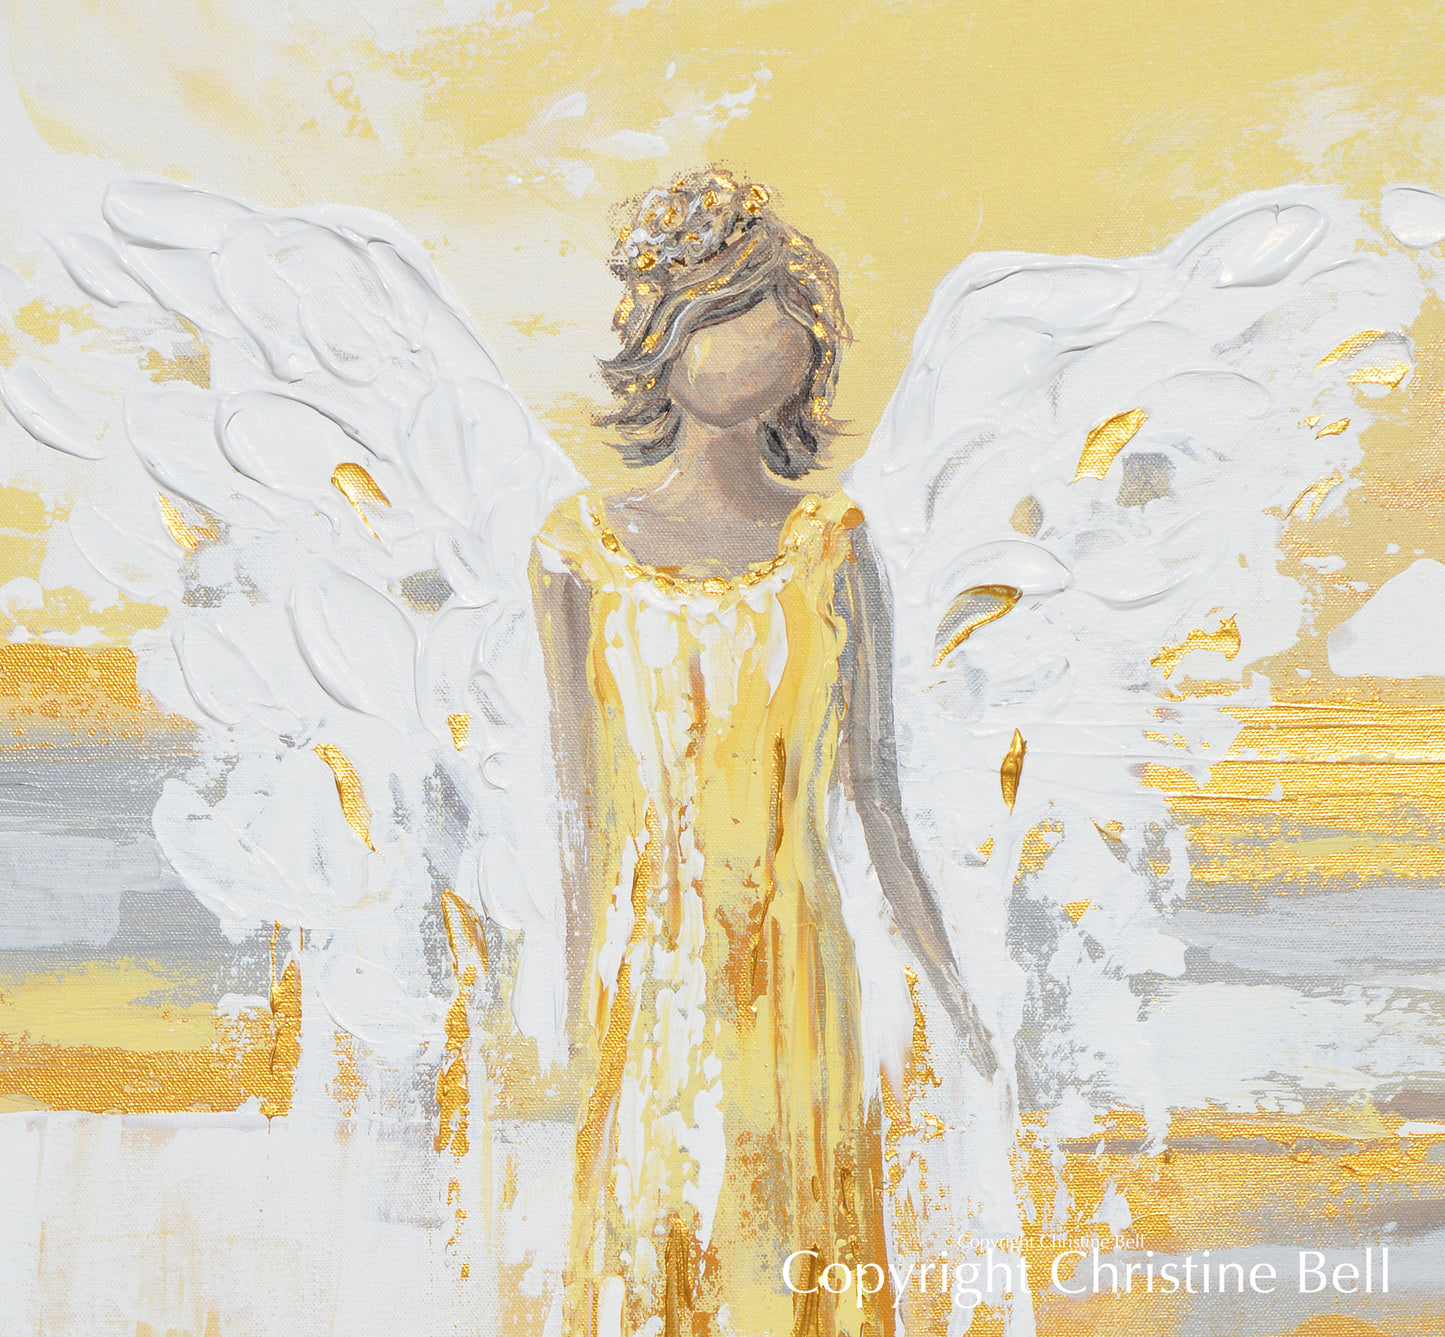 "Your Guiding Light" CANVAS PRINT Abstract Angel Painting Guardian Angel Art White Grey